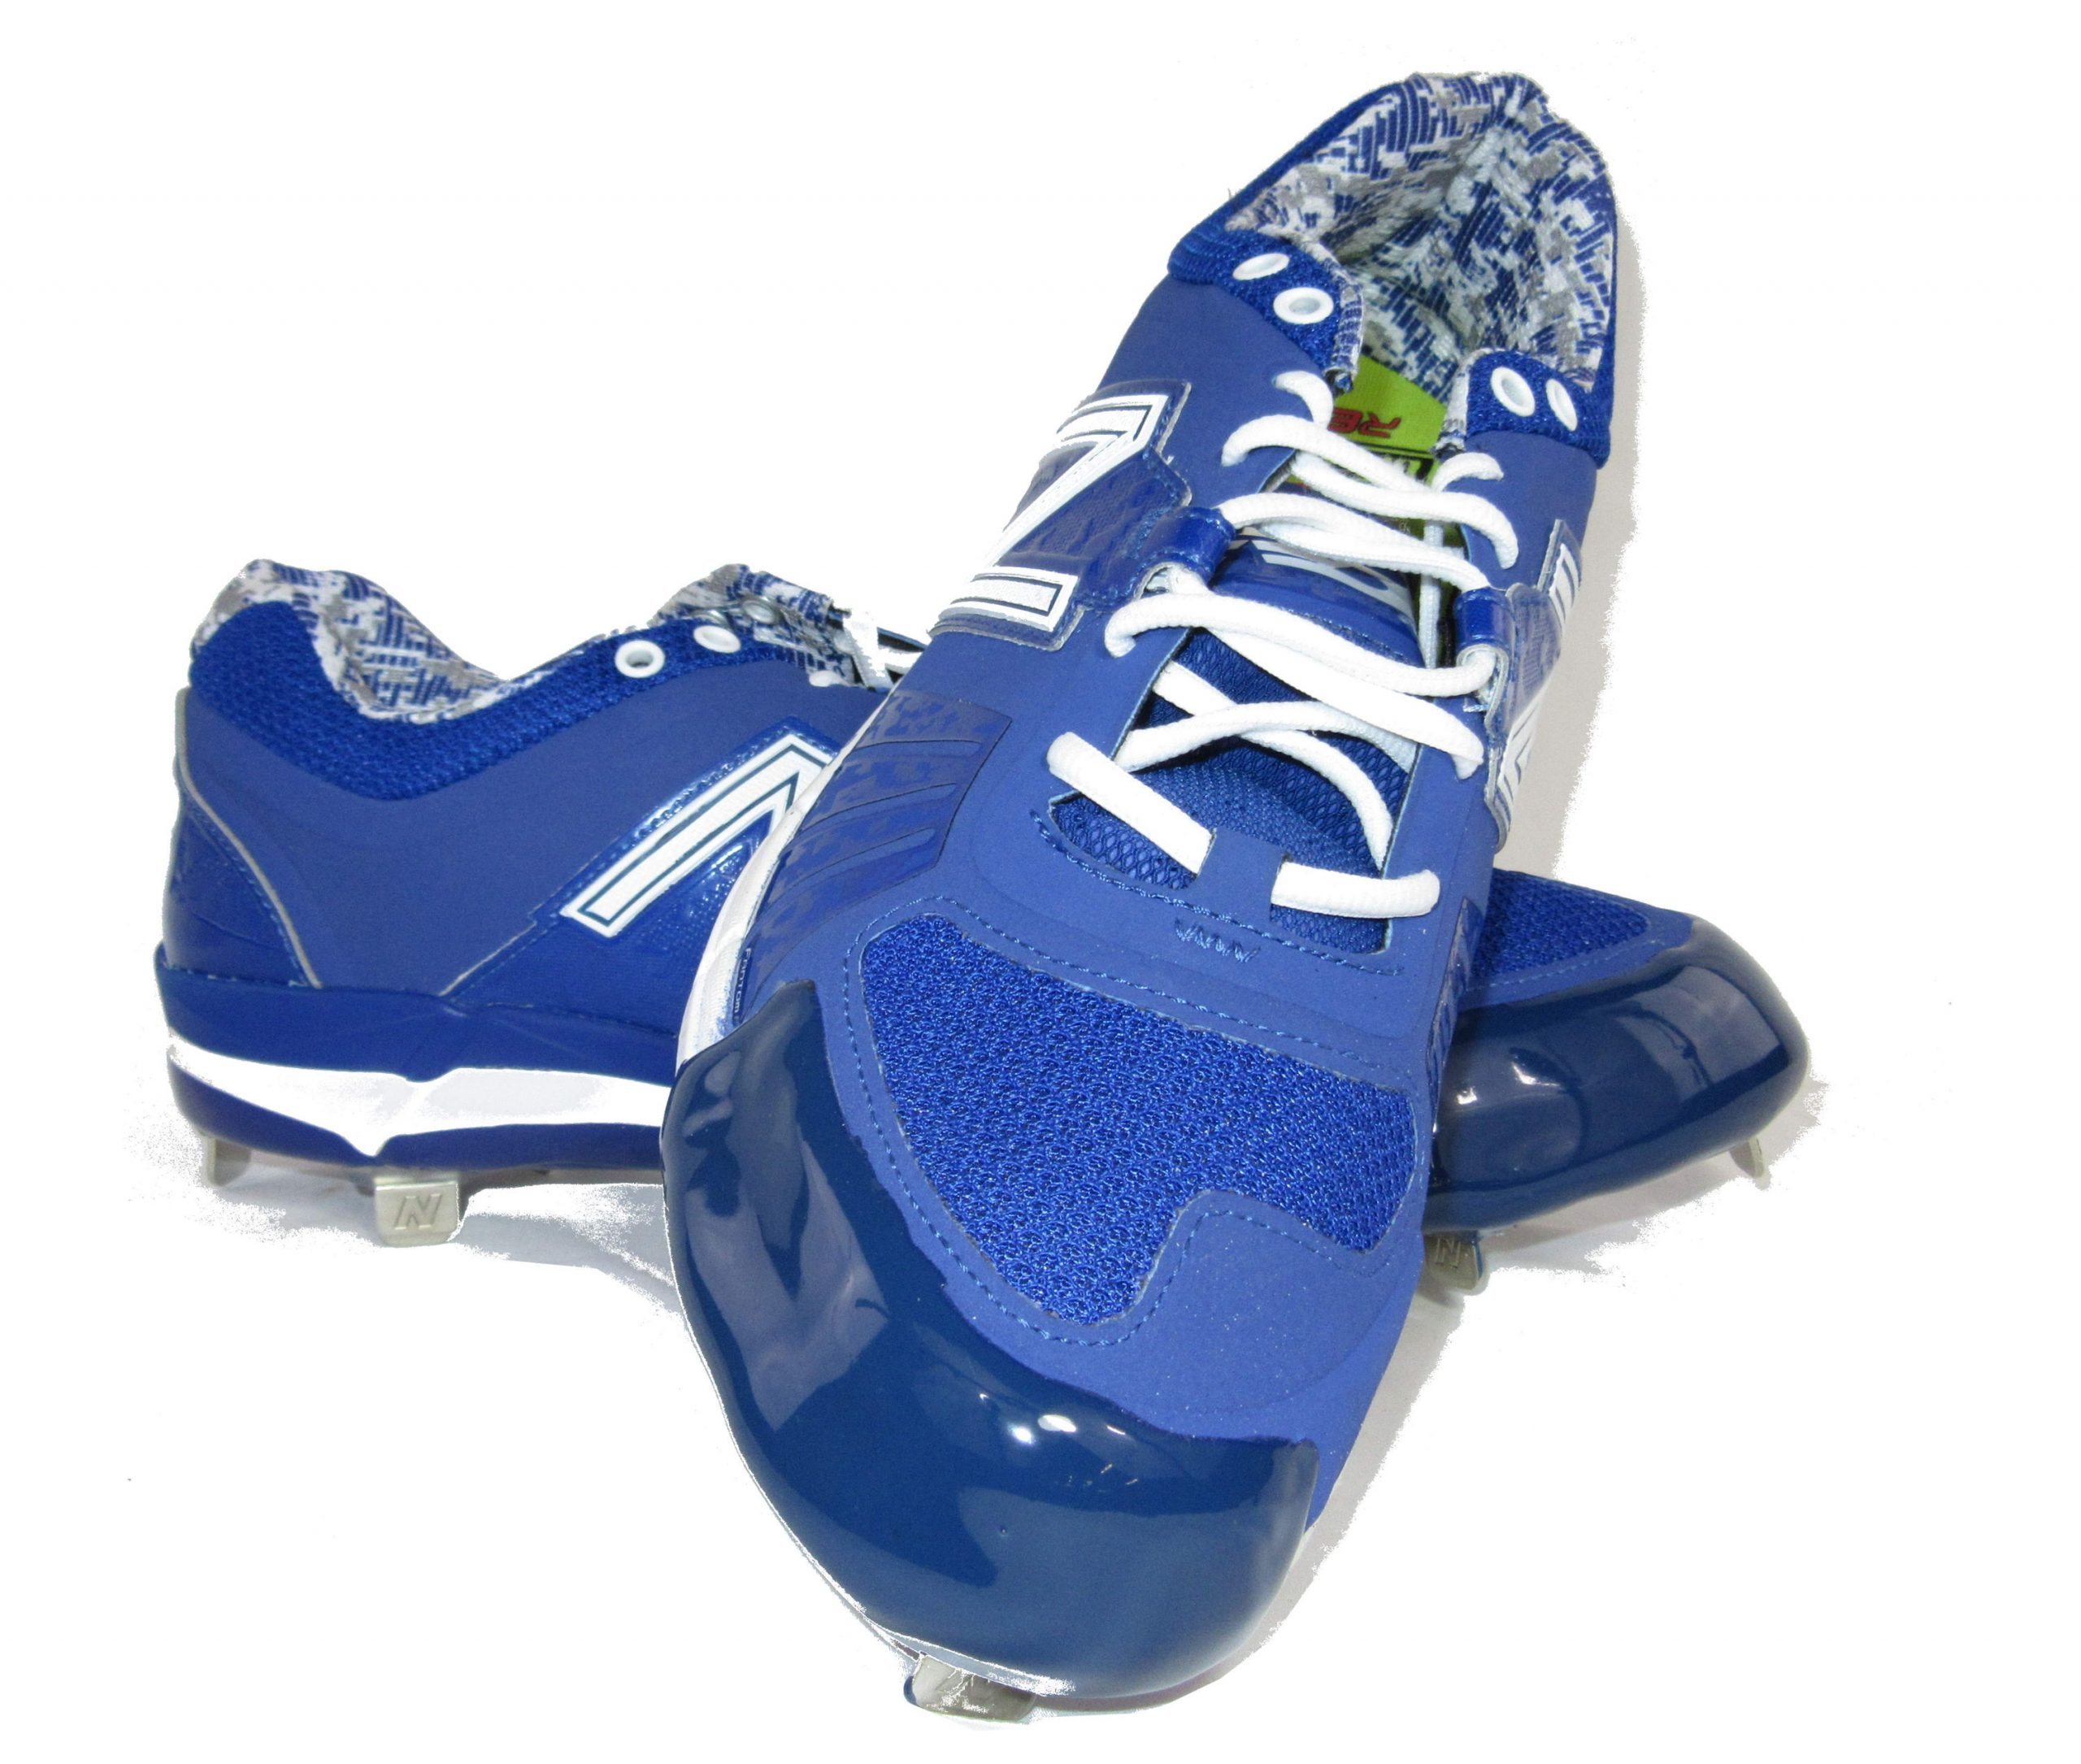 Tuff Toe shown applied to blue New Balance cleat to prevent drag toe and triple the lifespan.